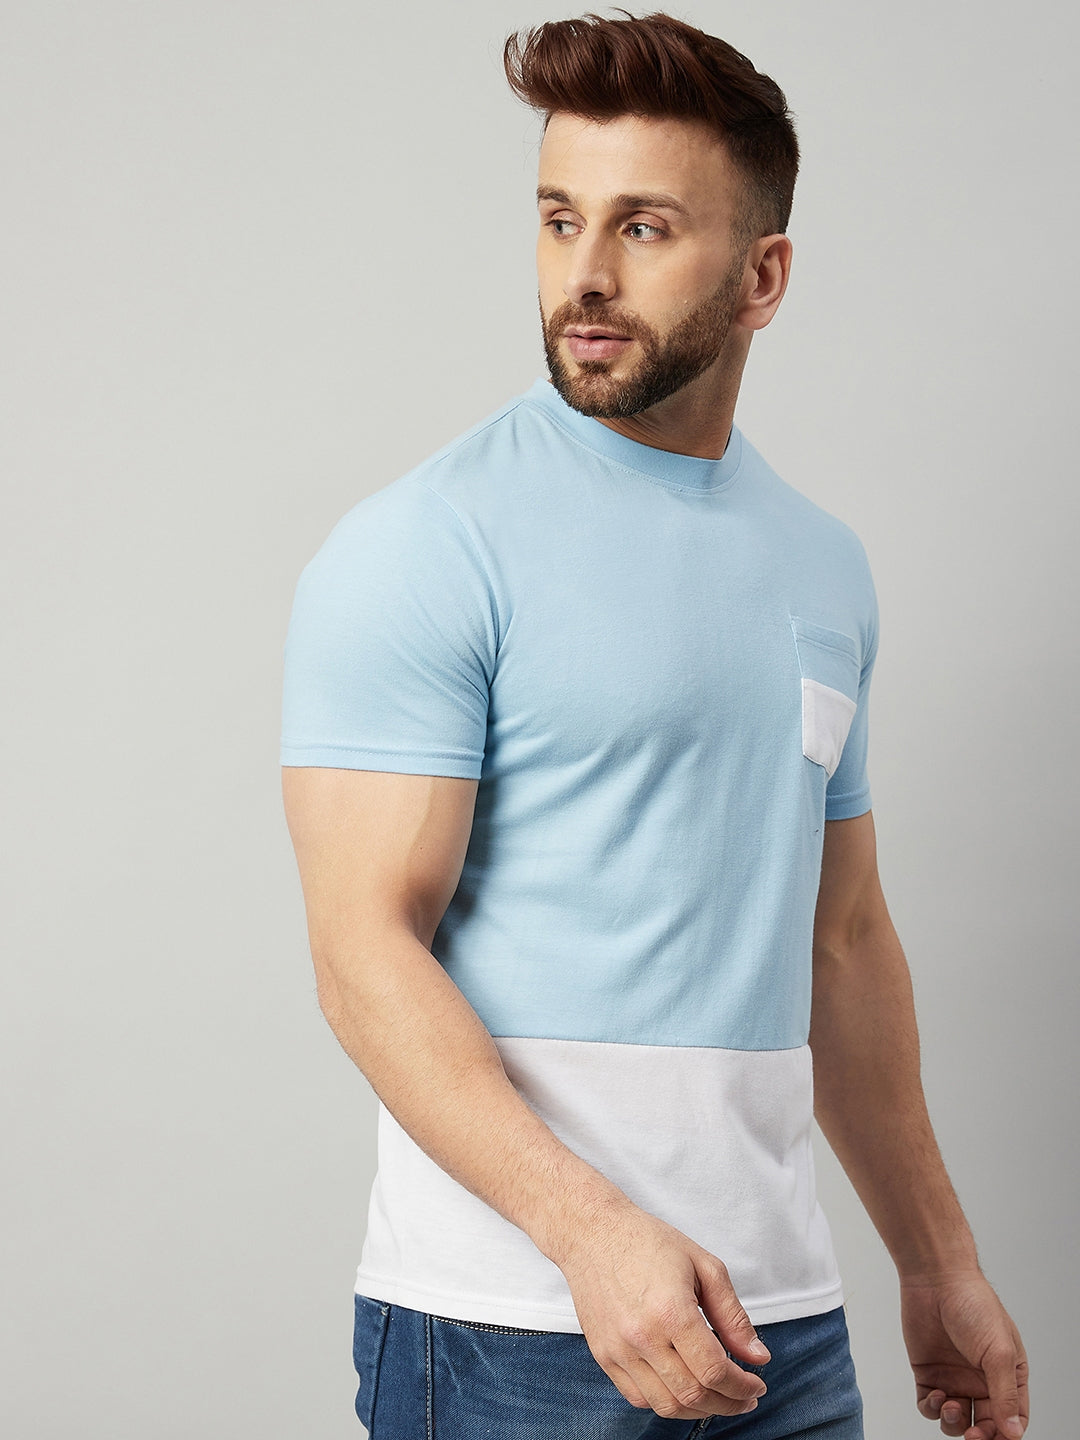 Sky Blue and White Round Neck  Color Block T-Shirt